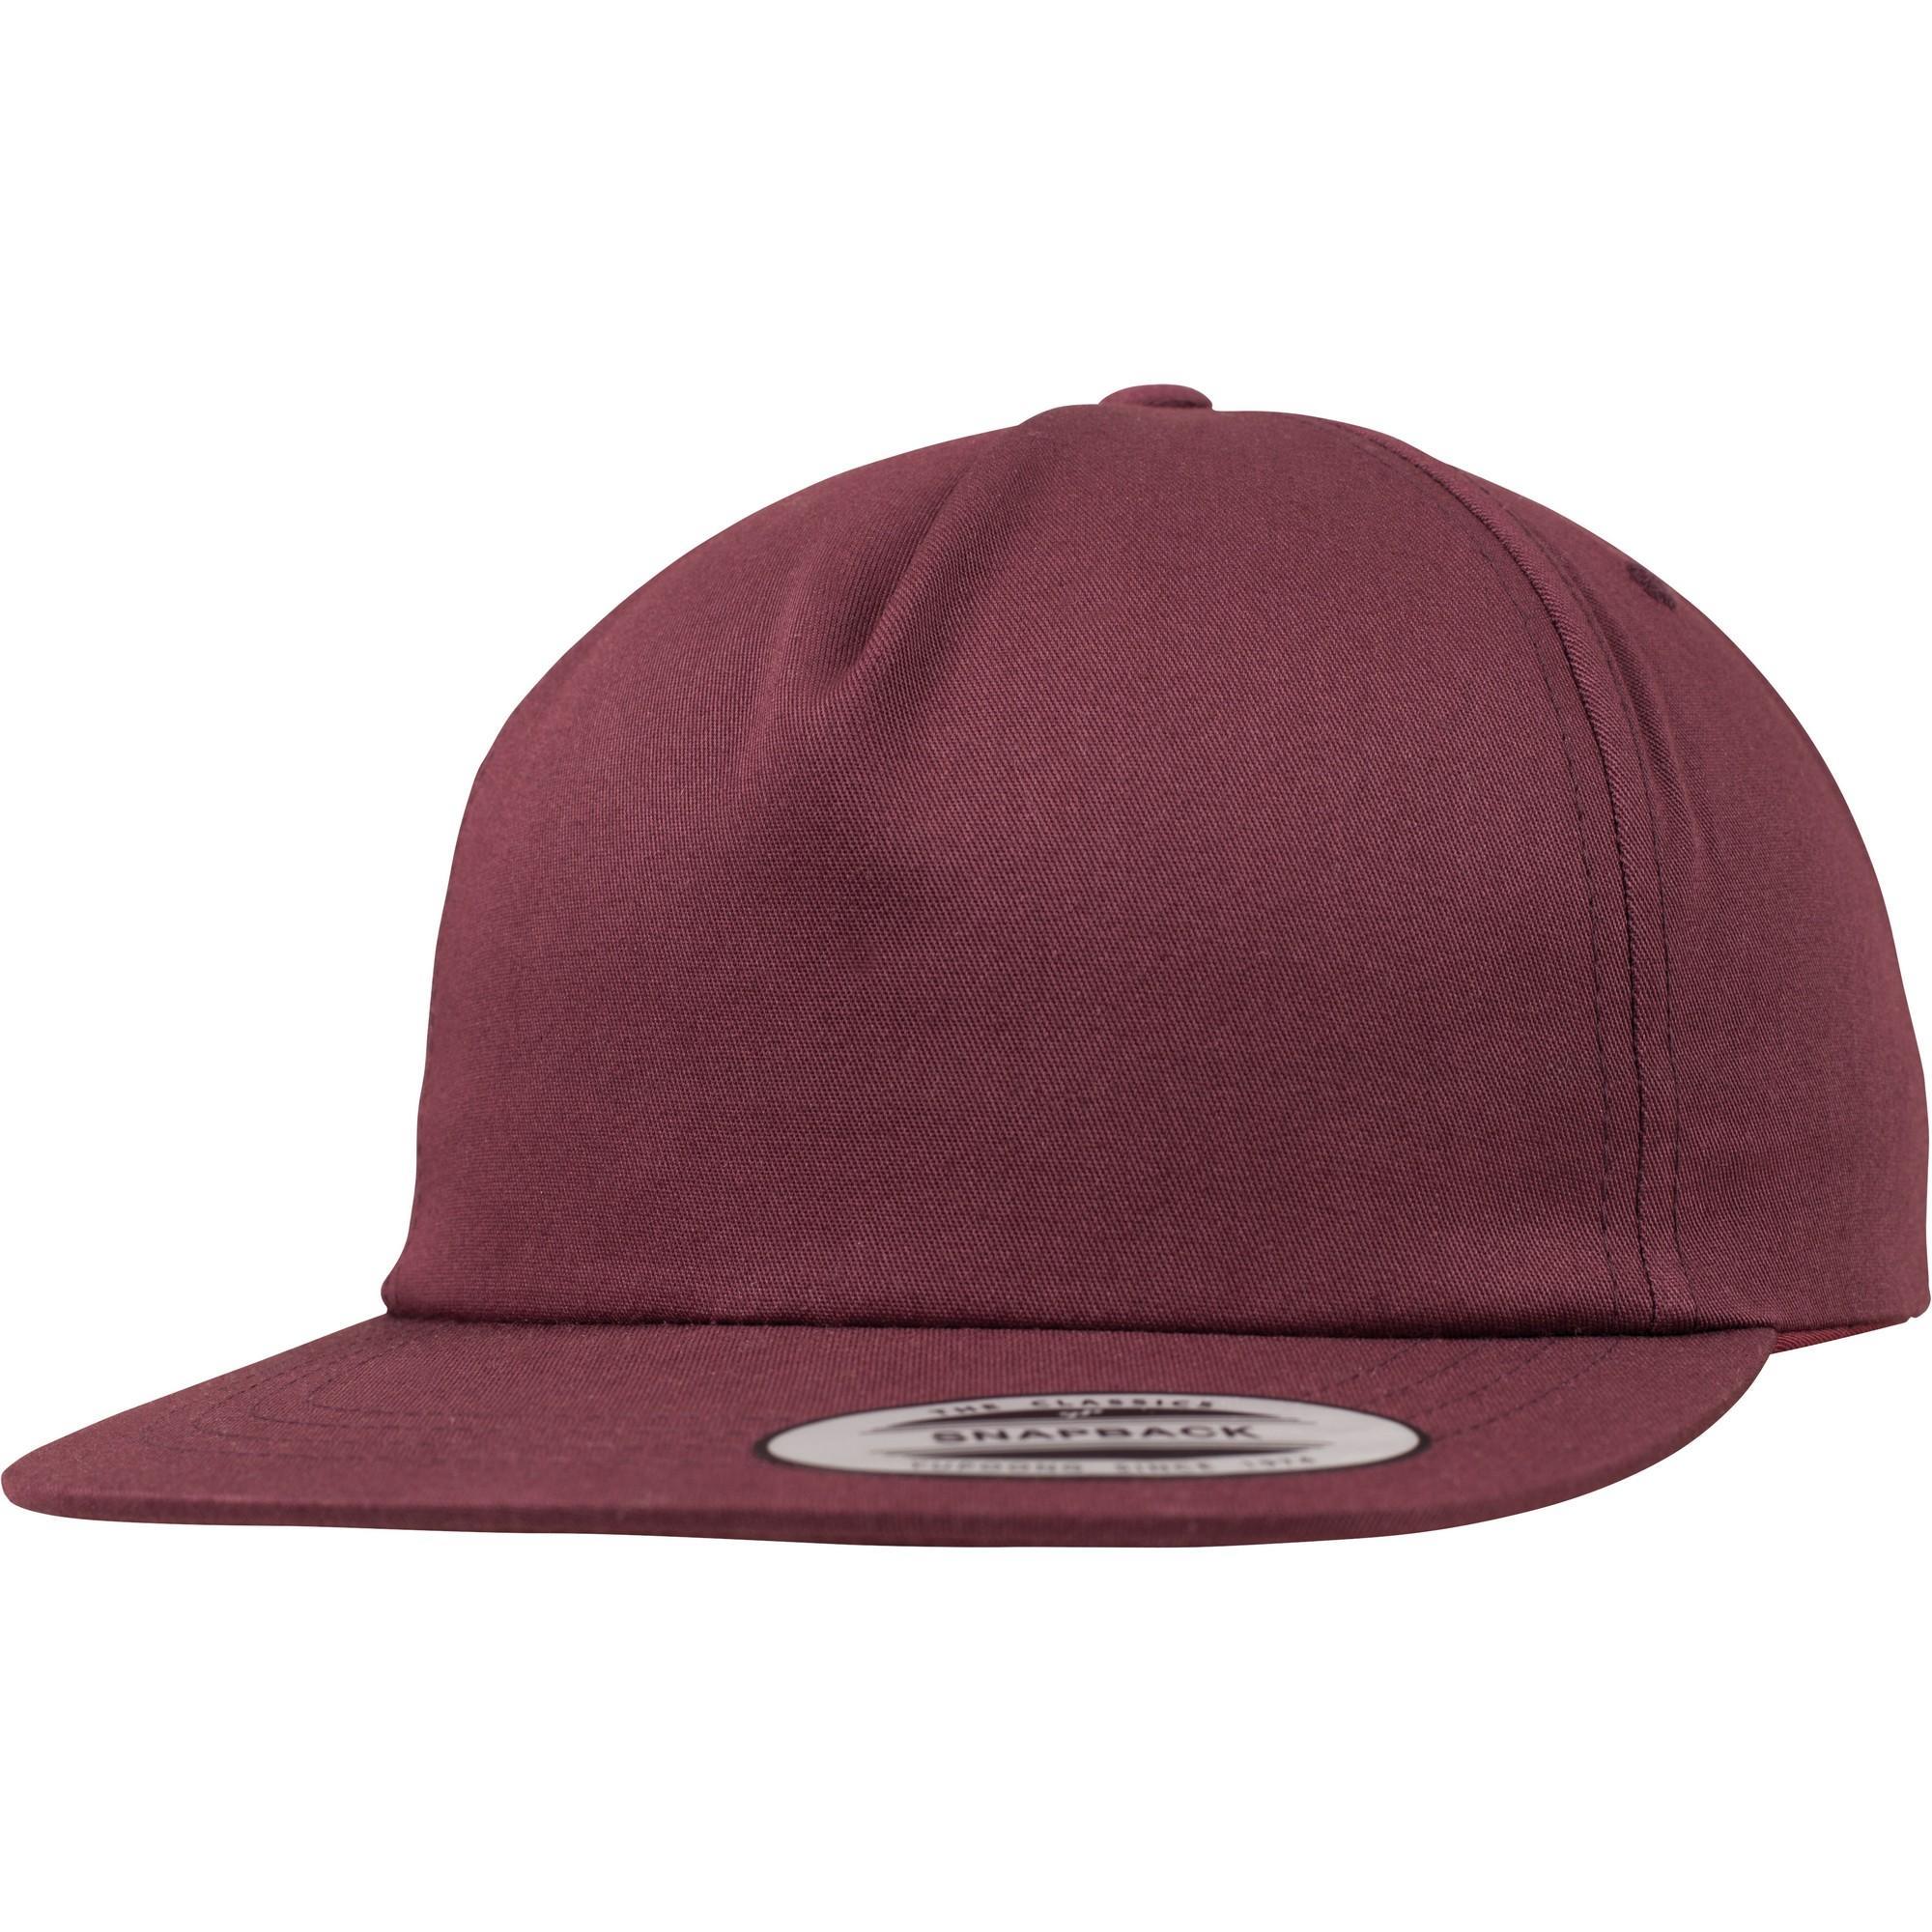 Yupoong Flexfit Unisex Unstructured 5 Panel Snapback Cap (Maroon) (One Size)